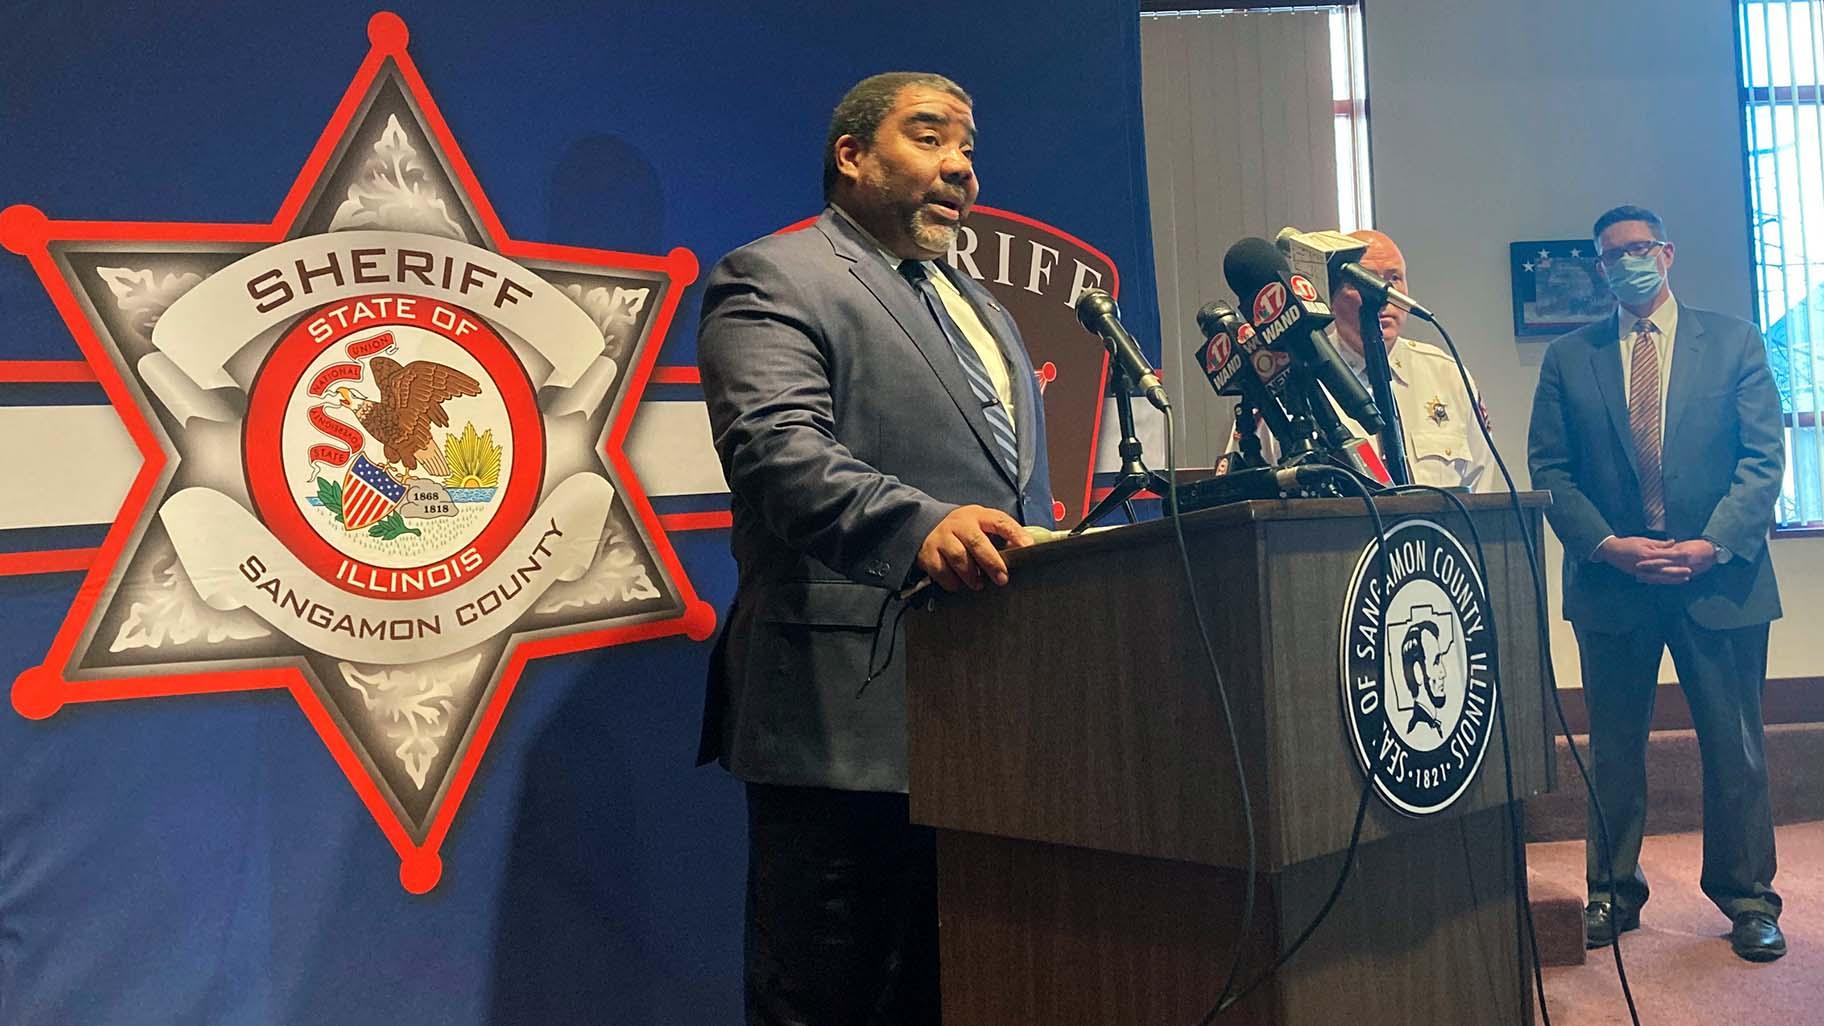 Marc Smith, director of the Illinois Department of Children and Family Services, discusses the stabbing death of state child welfare worker Diedre Silas during a news conference on Jan. 5, 2022, in Springfield. (AP Photo / John O'Connor)